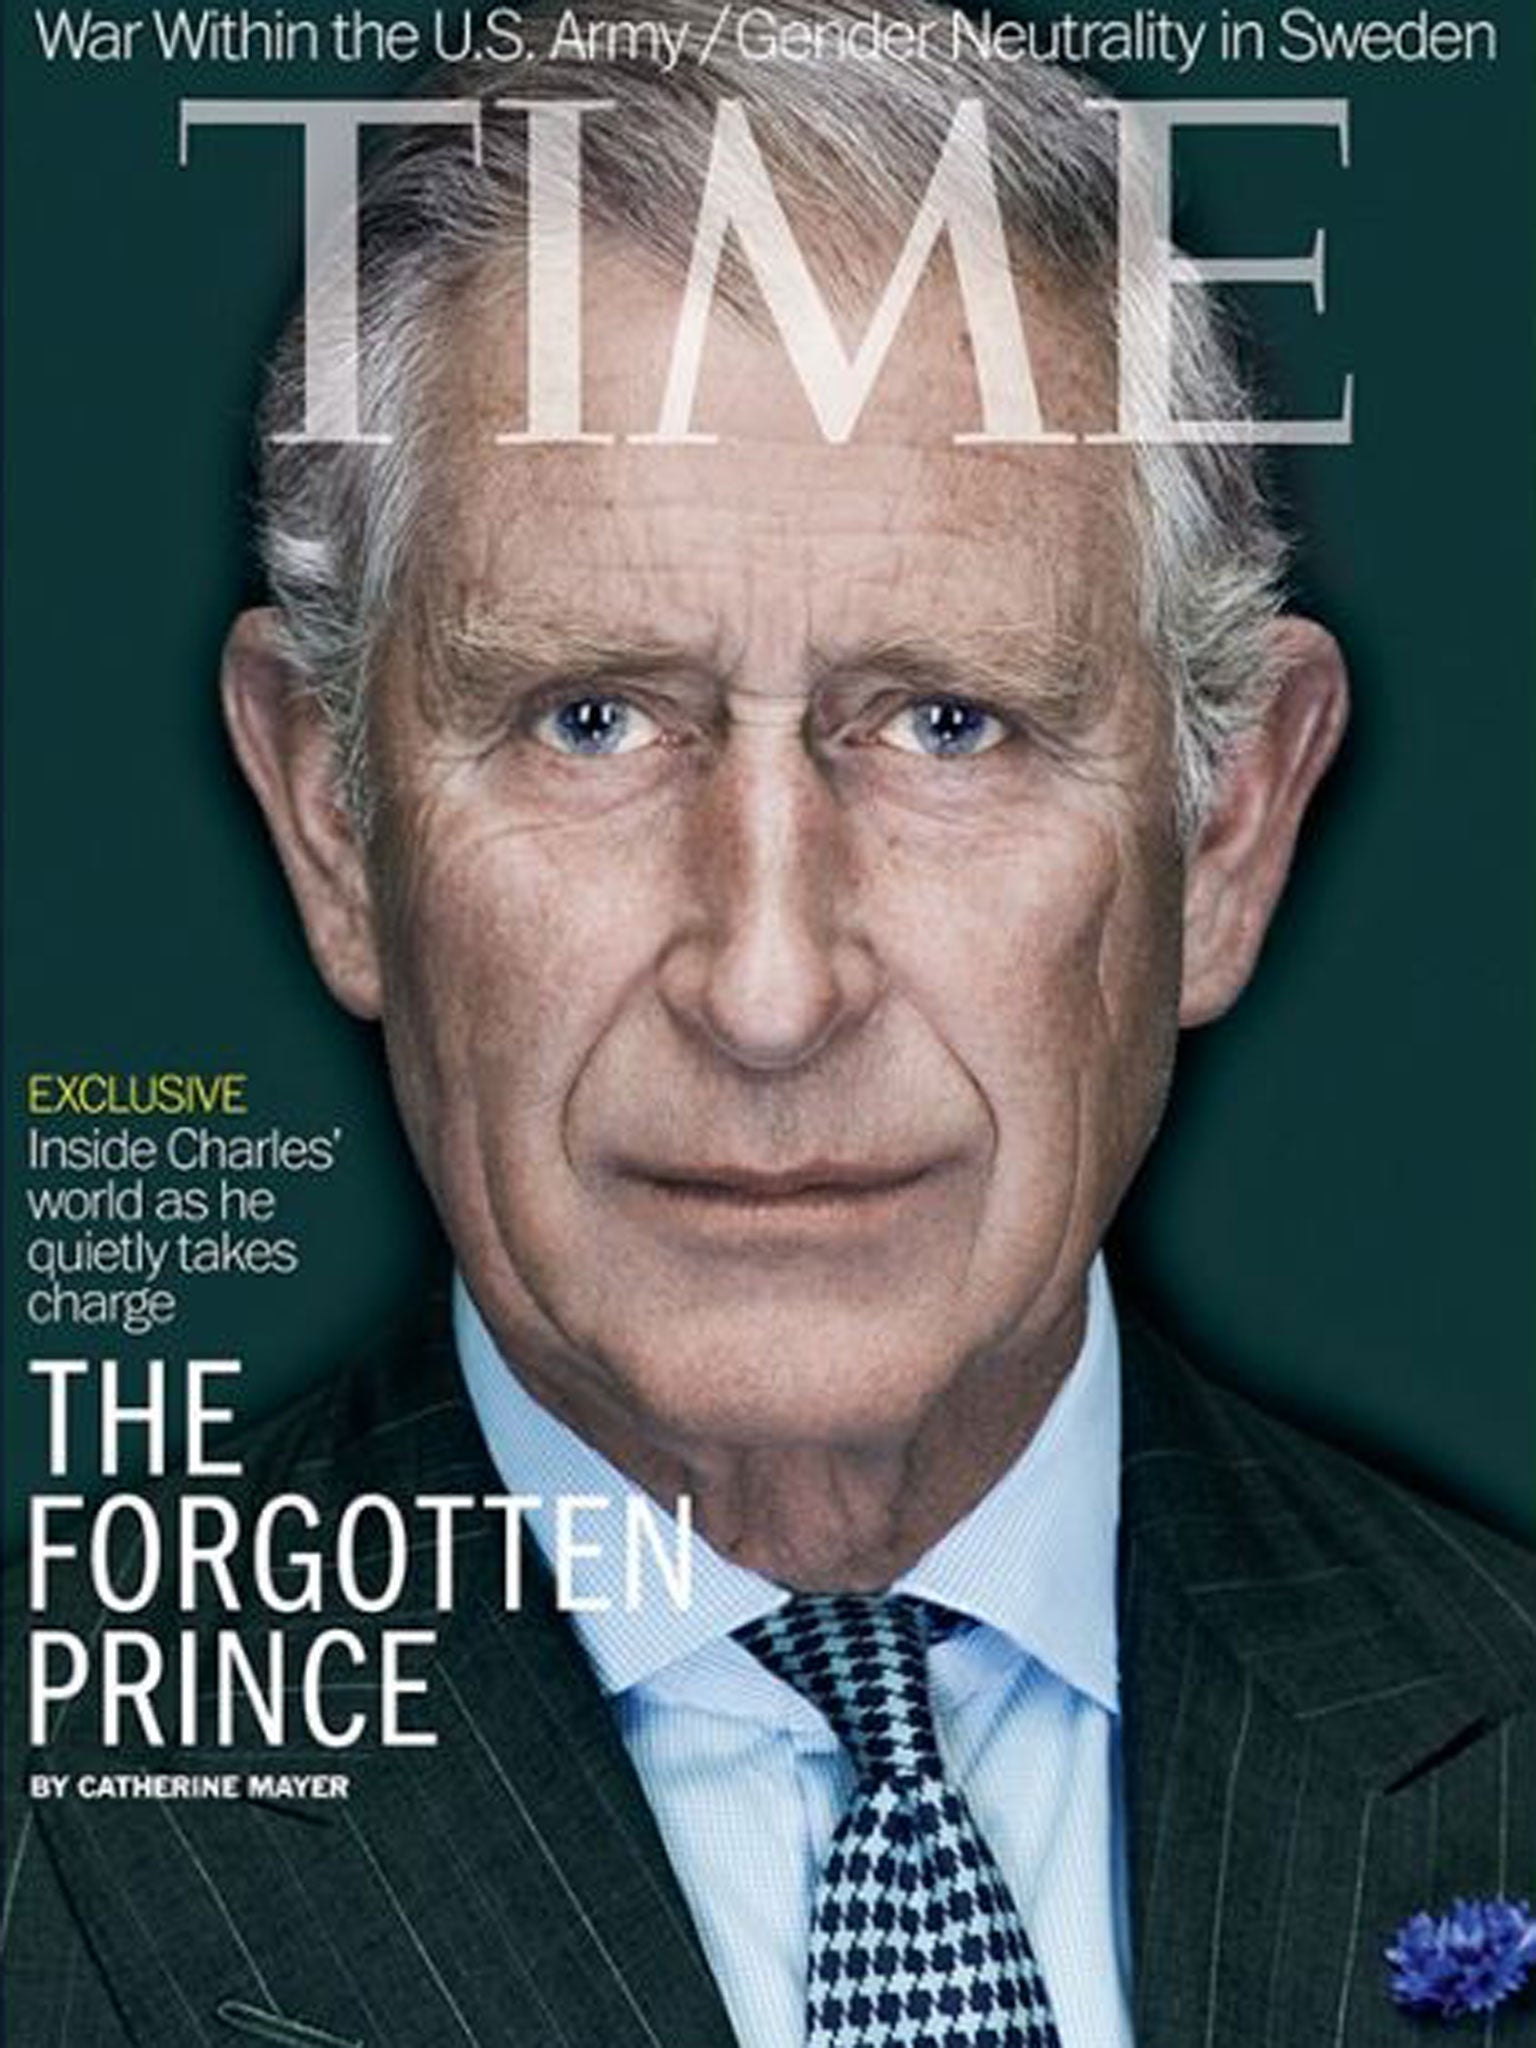 Clarence House has denied reports that Prince Charles believes becoming King would be akin to 'prison' after a profile printed by TIME magazine said it would be when the 'prison shades' close